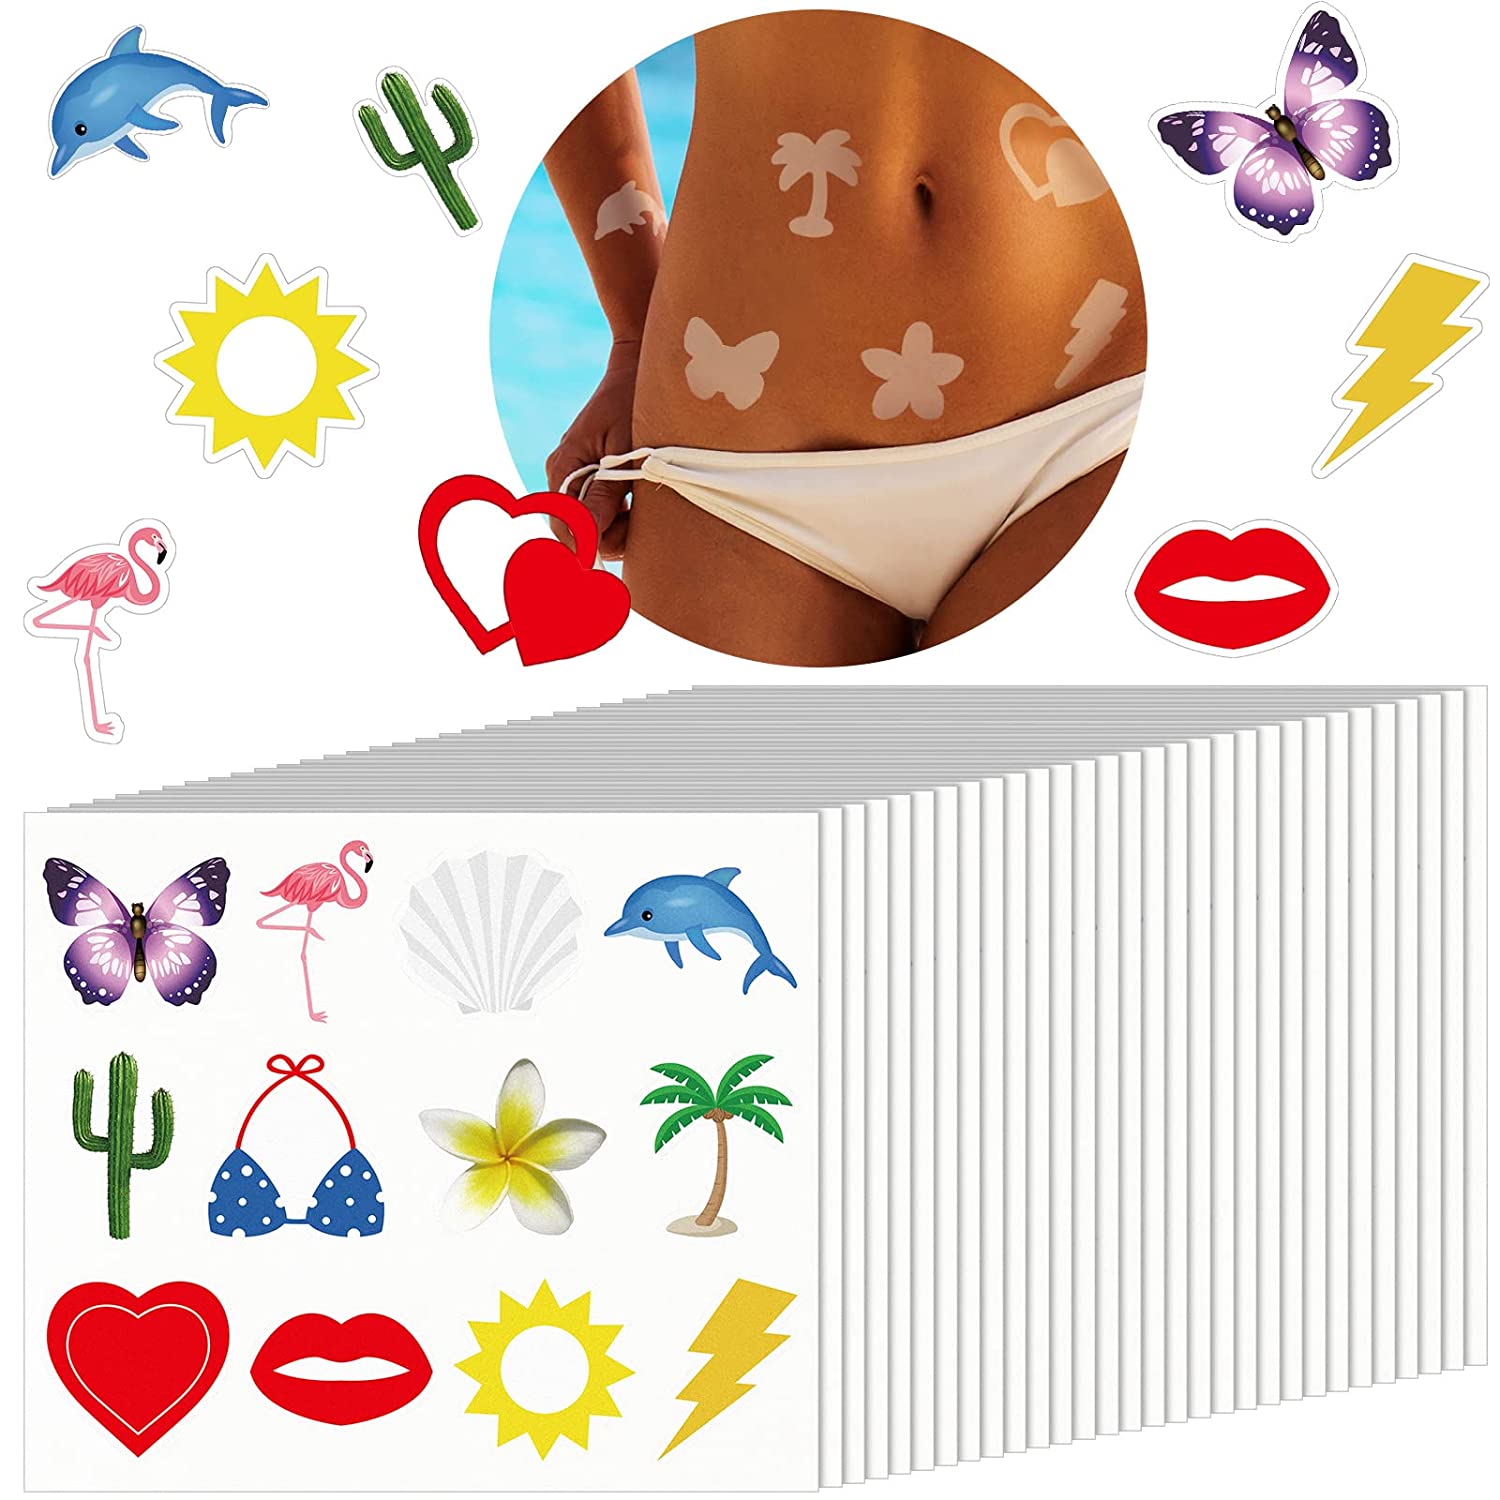 Bunny Tanning Stickers is the best way to keep your stickers and tanning at  the same time. | tanningsticker.com